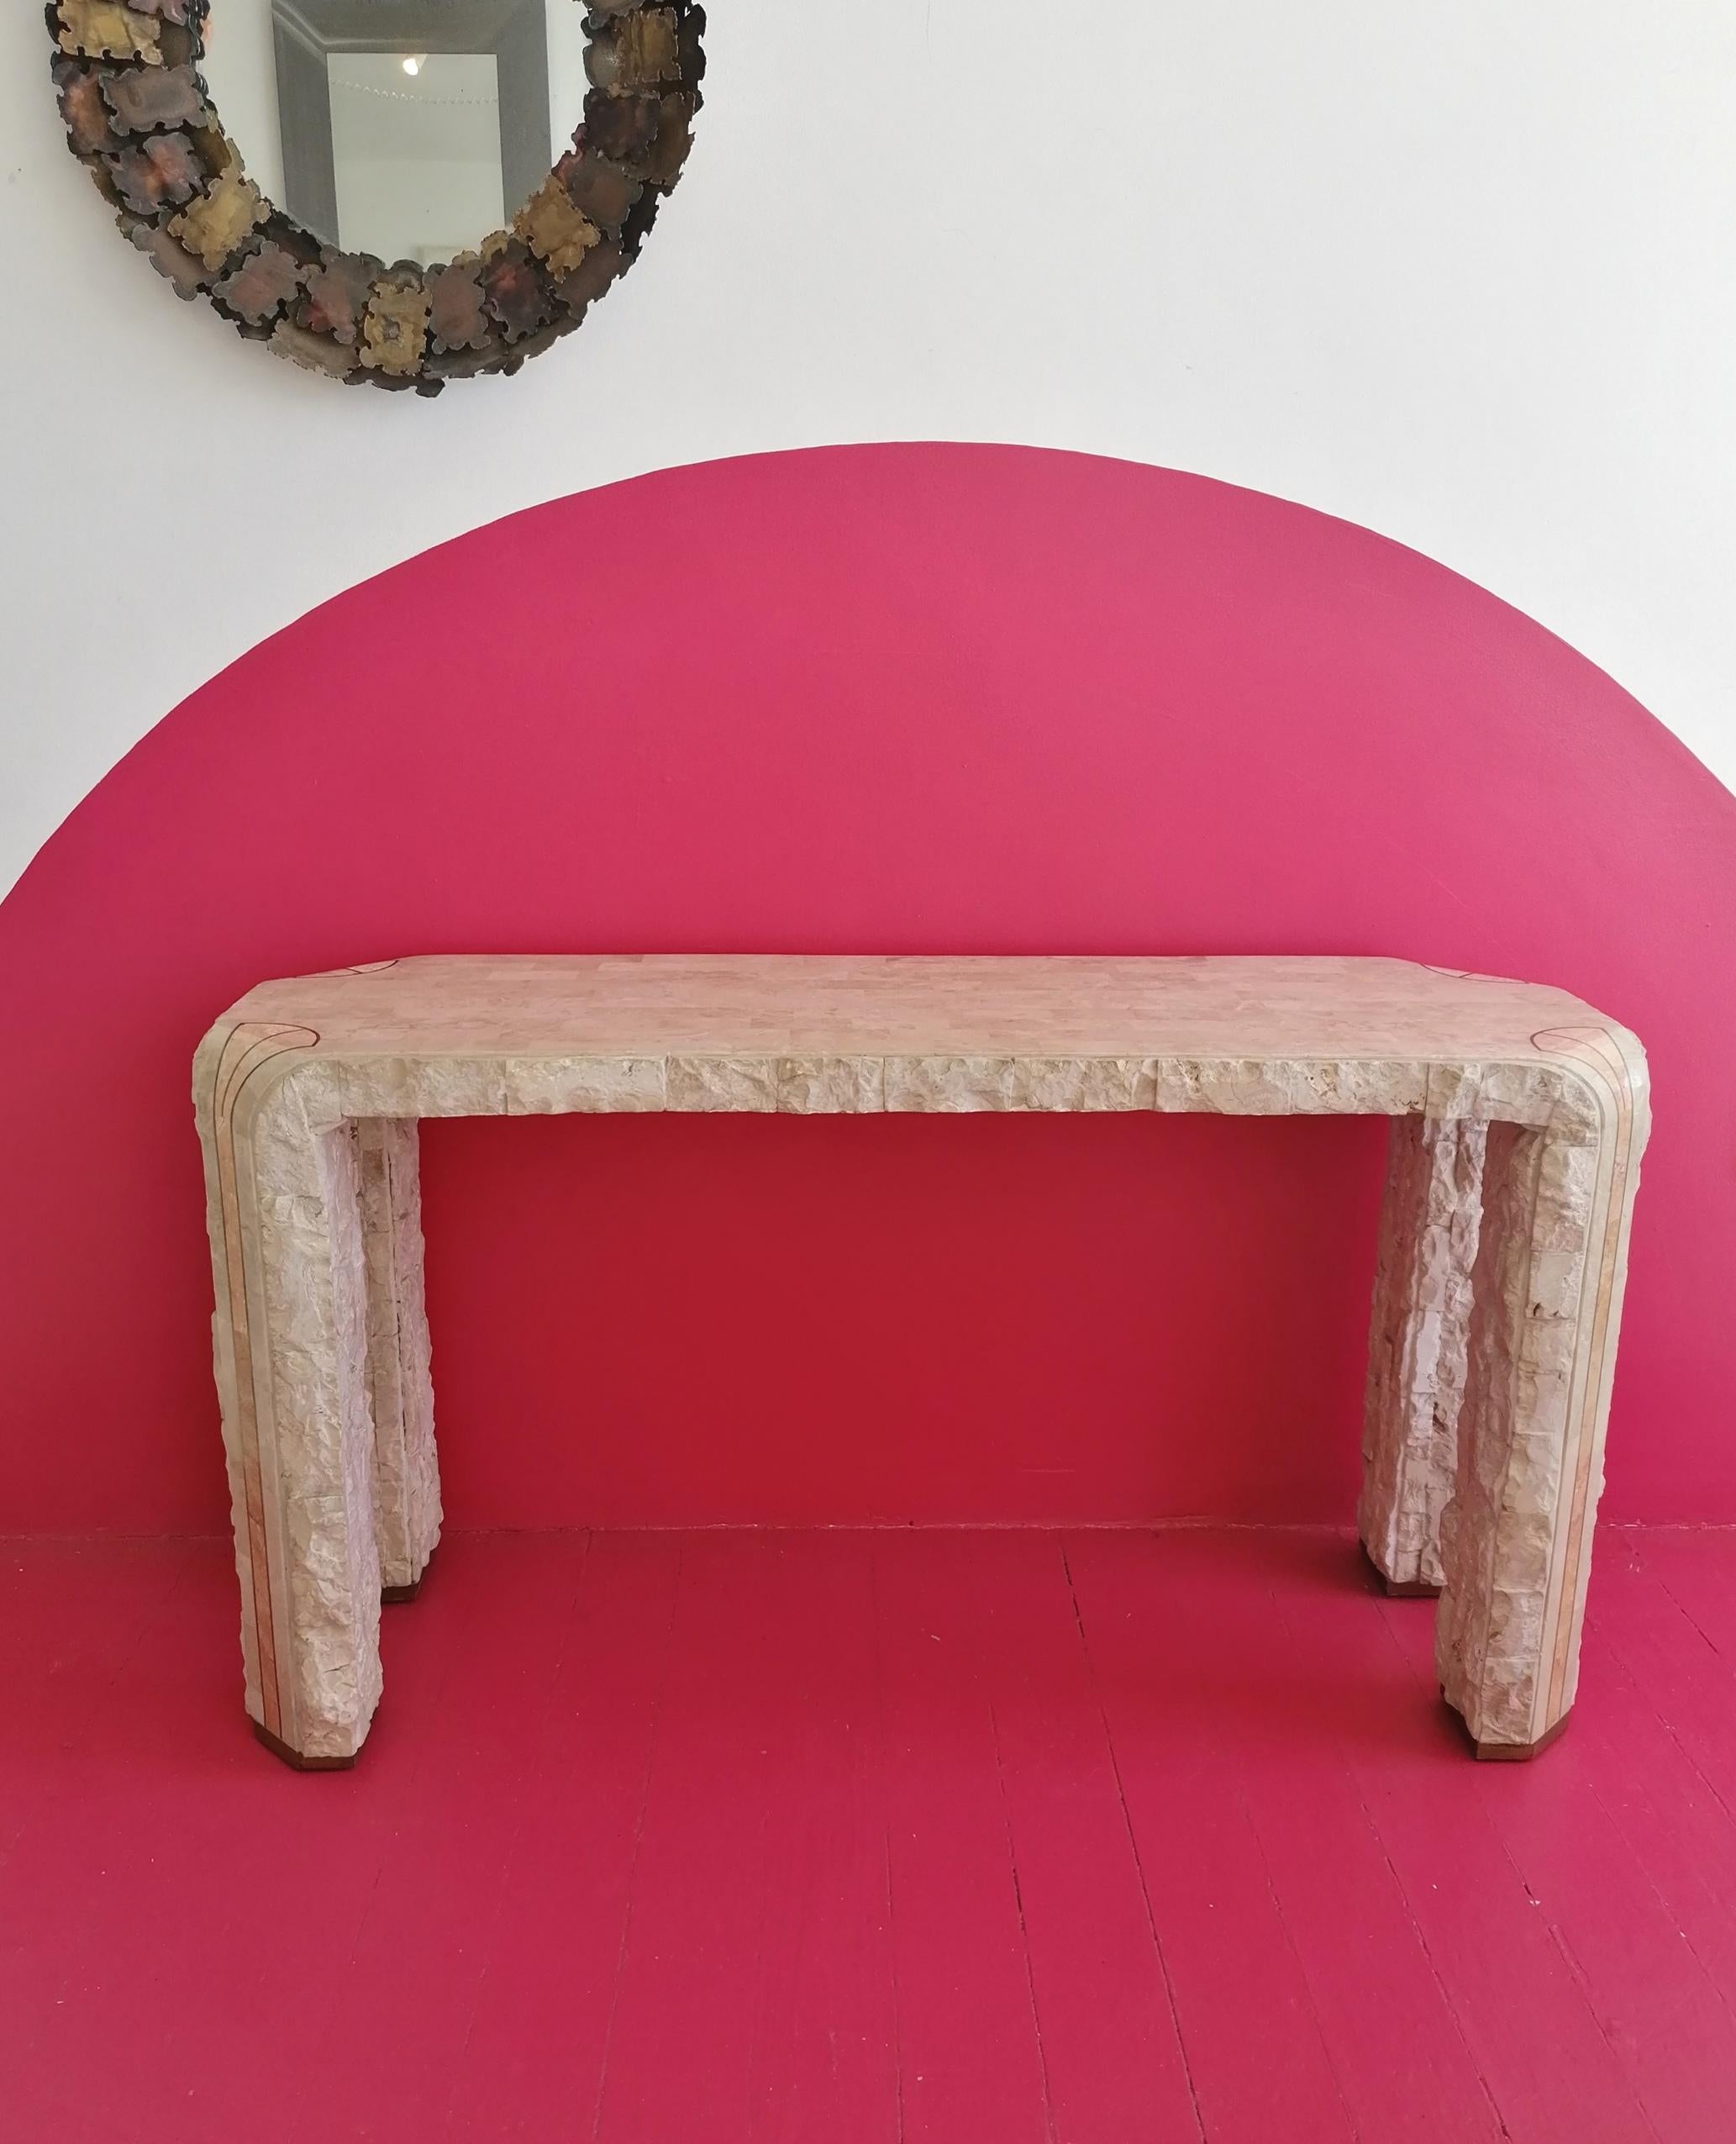 Large postmodern Maitland Smith console table: polished tessellated stone with rough-hewn edges. Corners have a pink-toned stone detail with brass inlay. Brass-trimmed legs. USA, 1980s.